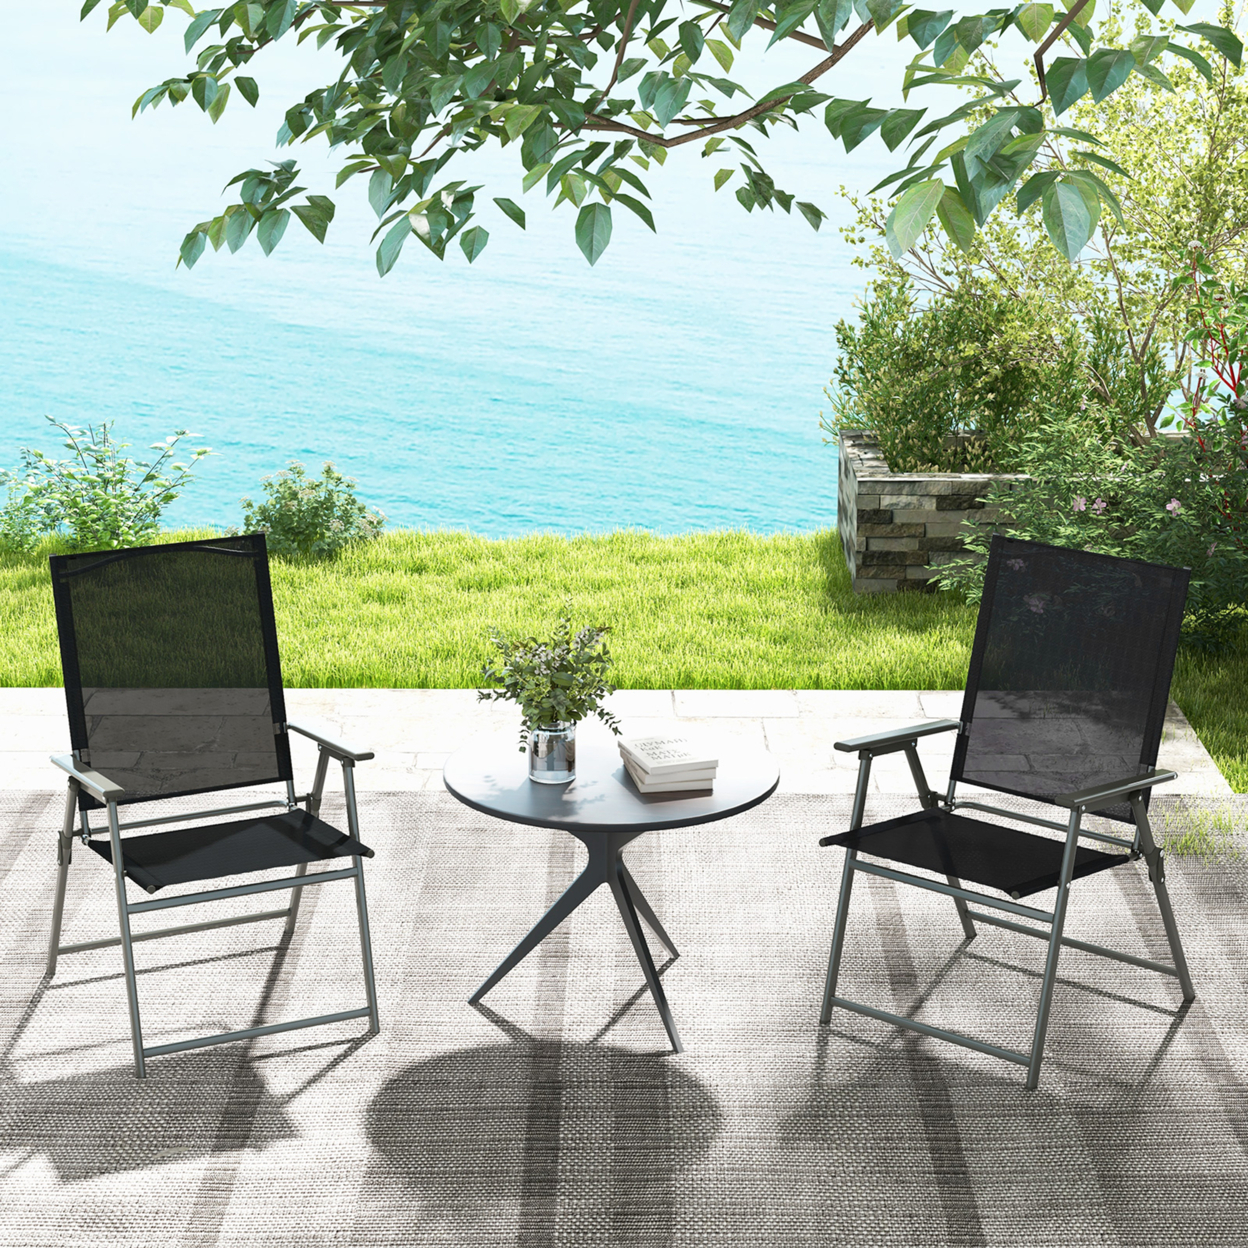 2PCS Patio Portable Metal Folding Chairs Dining Chair Set Poolside Garden